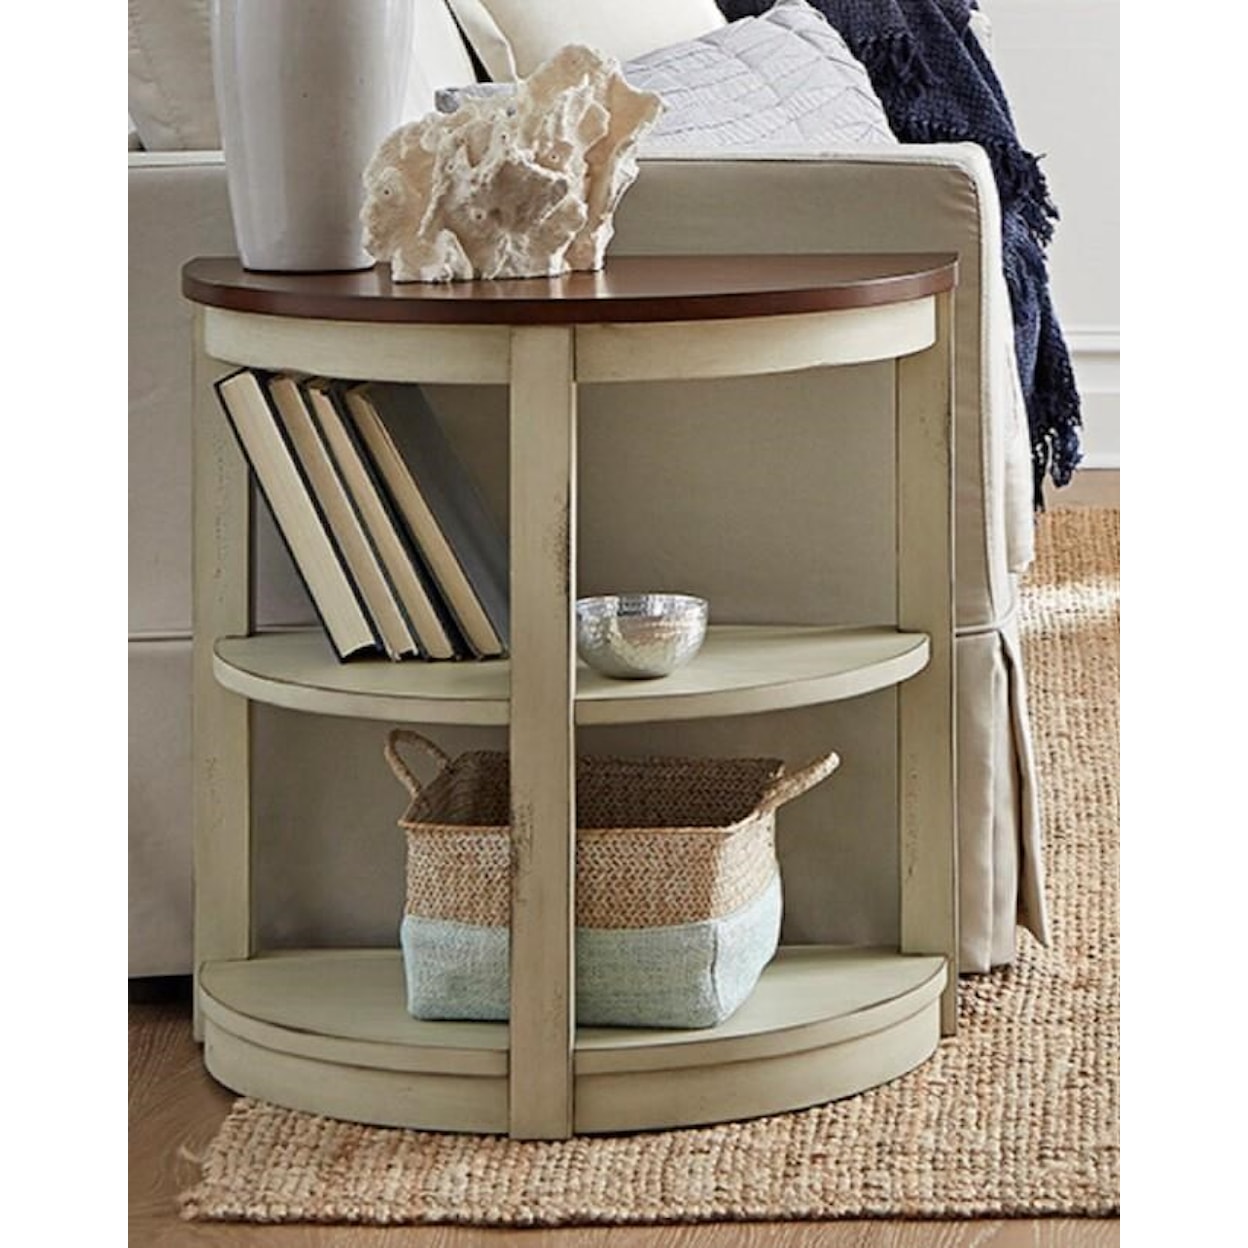 Null Furniture 6618 Expressions Demilume End Table